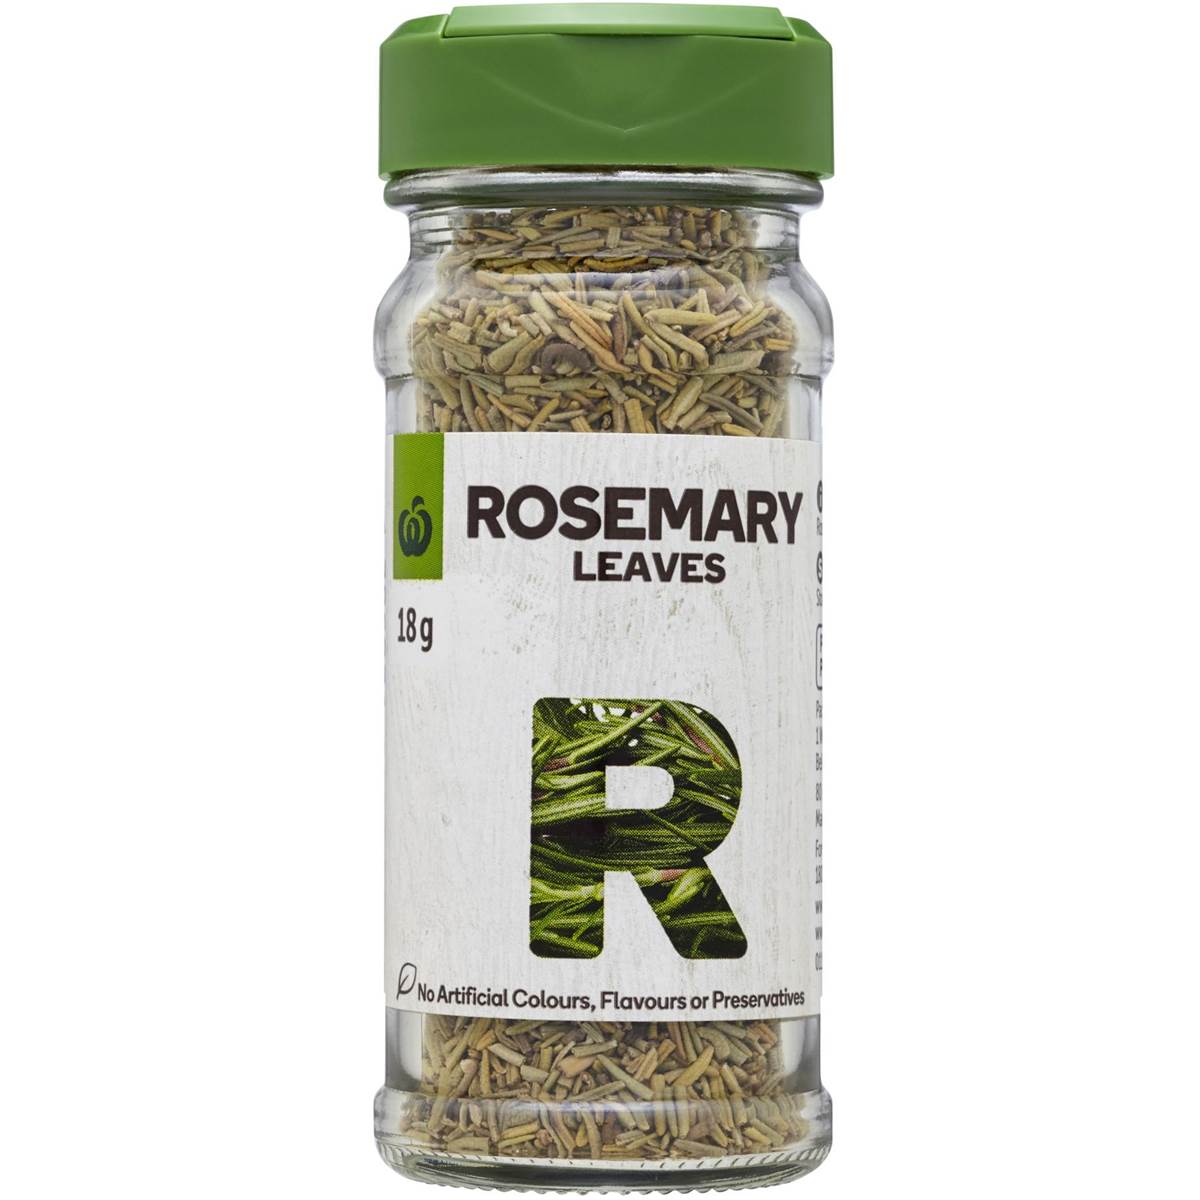 Calories in Woolworths Rosemary Leaves